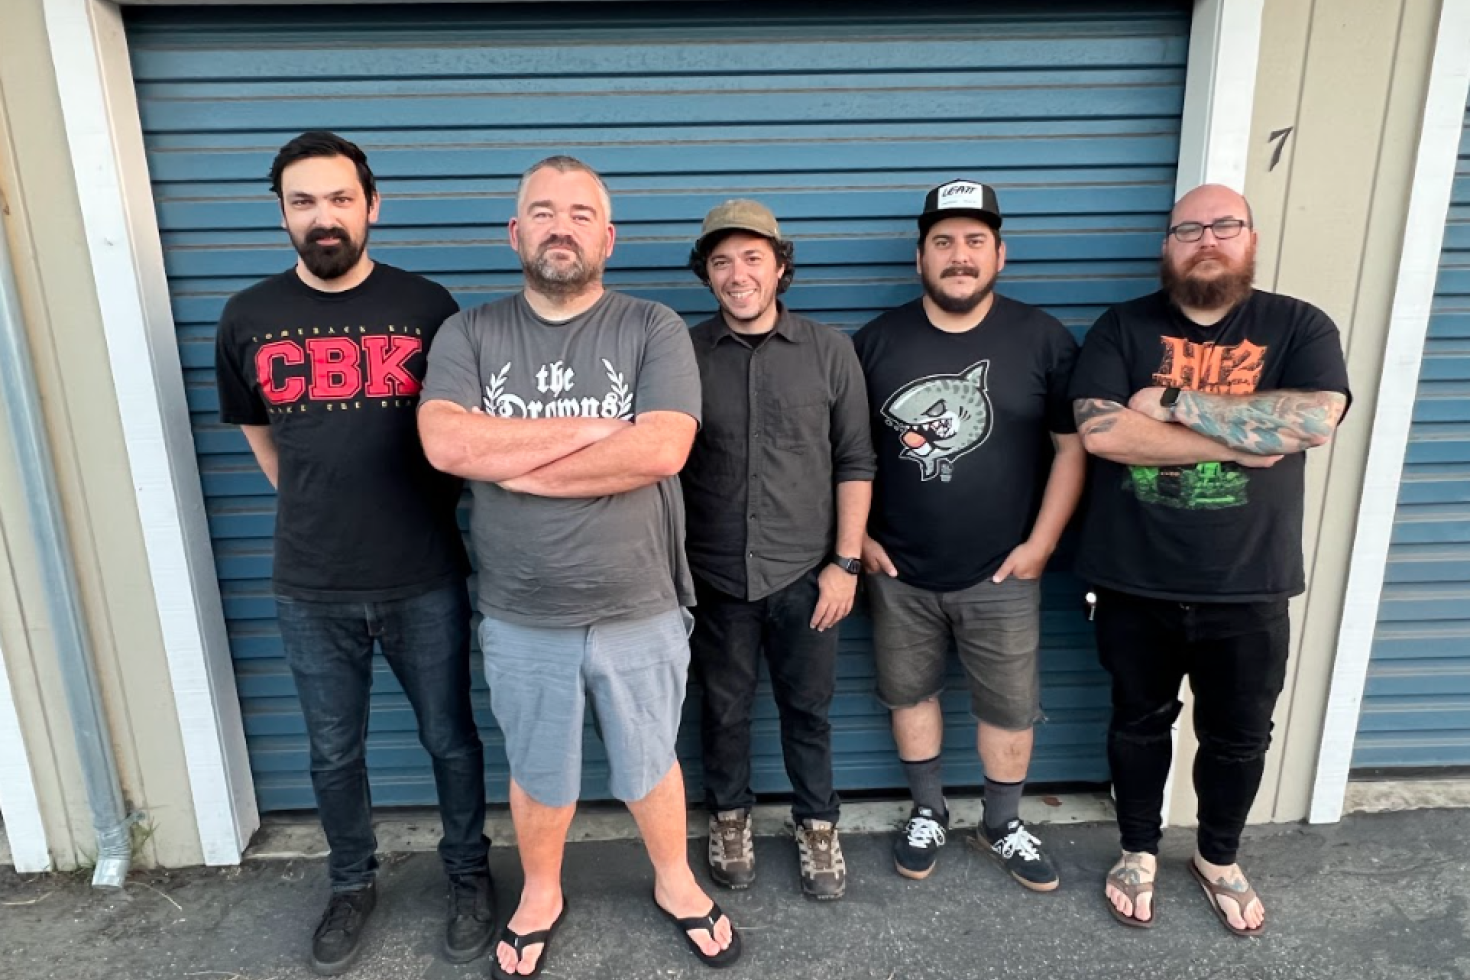 PREMIERE: Santa Cruz melodic punks Give You Nothing share video for new single 'The Hardest Part'